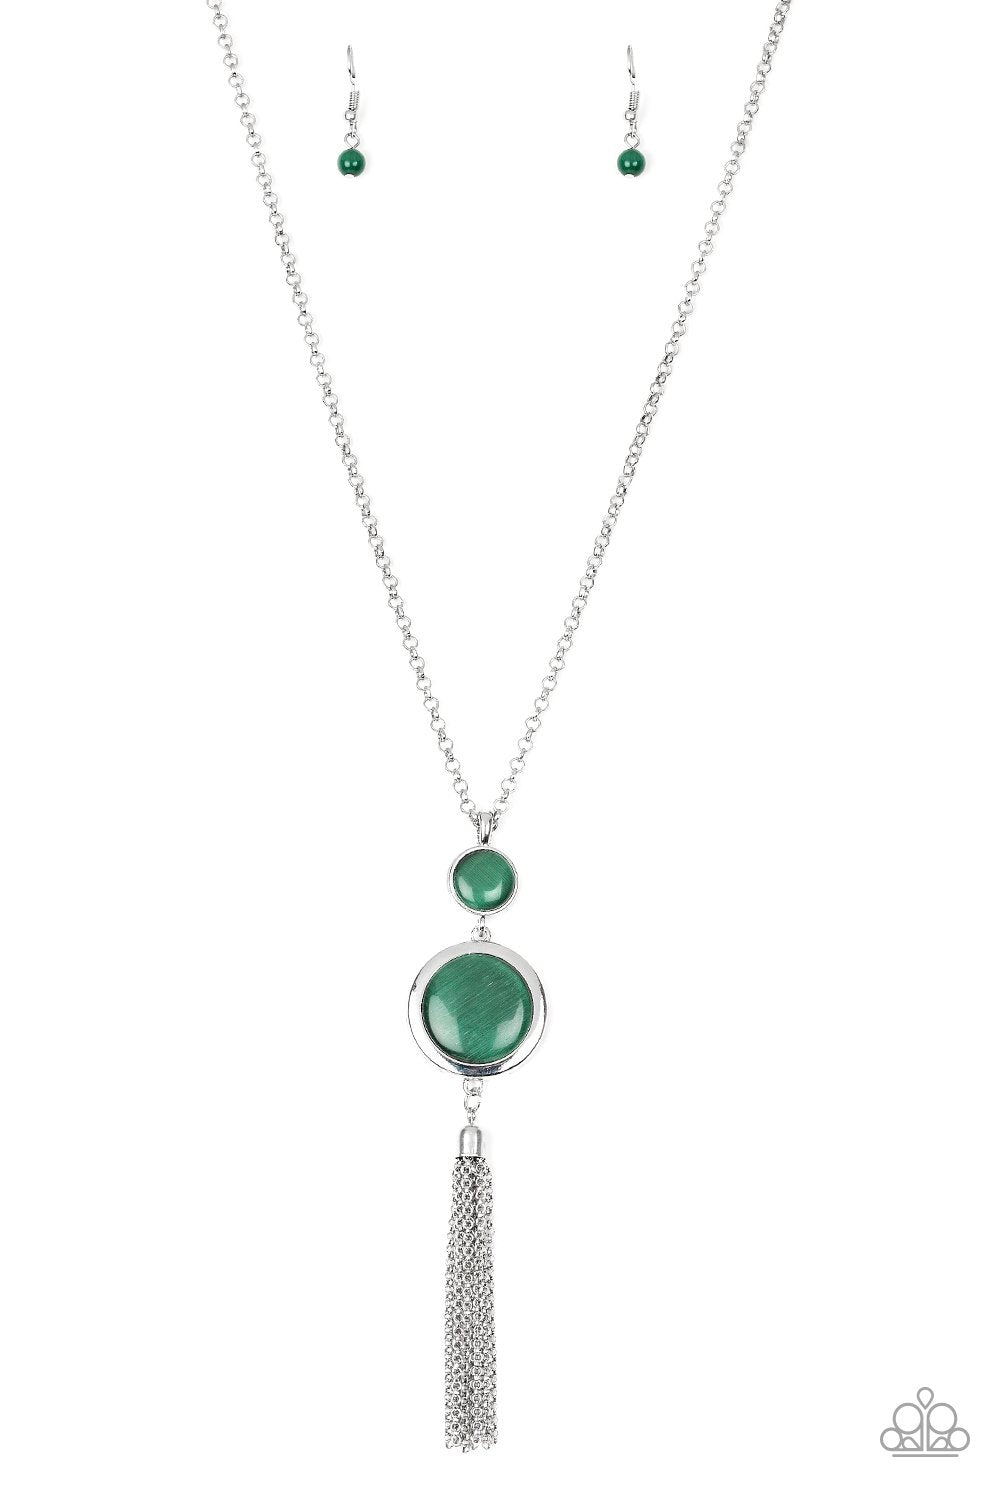 Have Some Common SENSEI Green Moonstone Necklace and matching Earrings - Paparazzi Accessories-CarasShop.com - $5 Jewelry by Cara Jewels